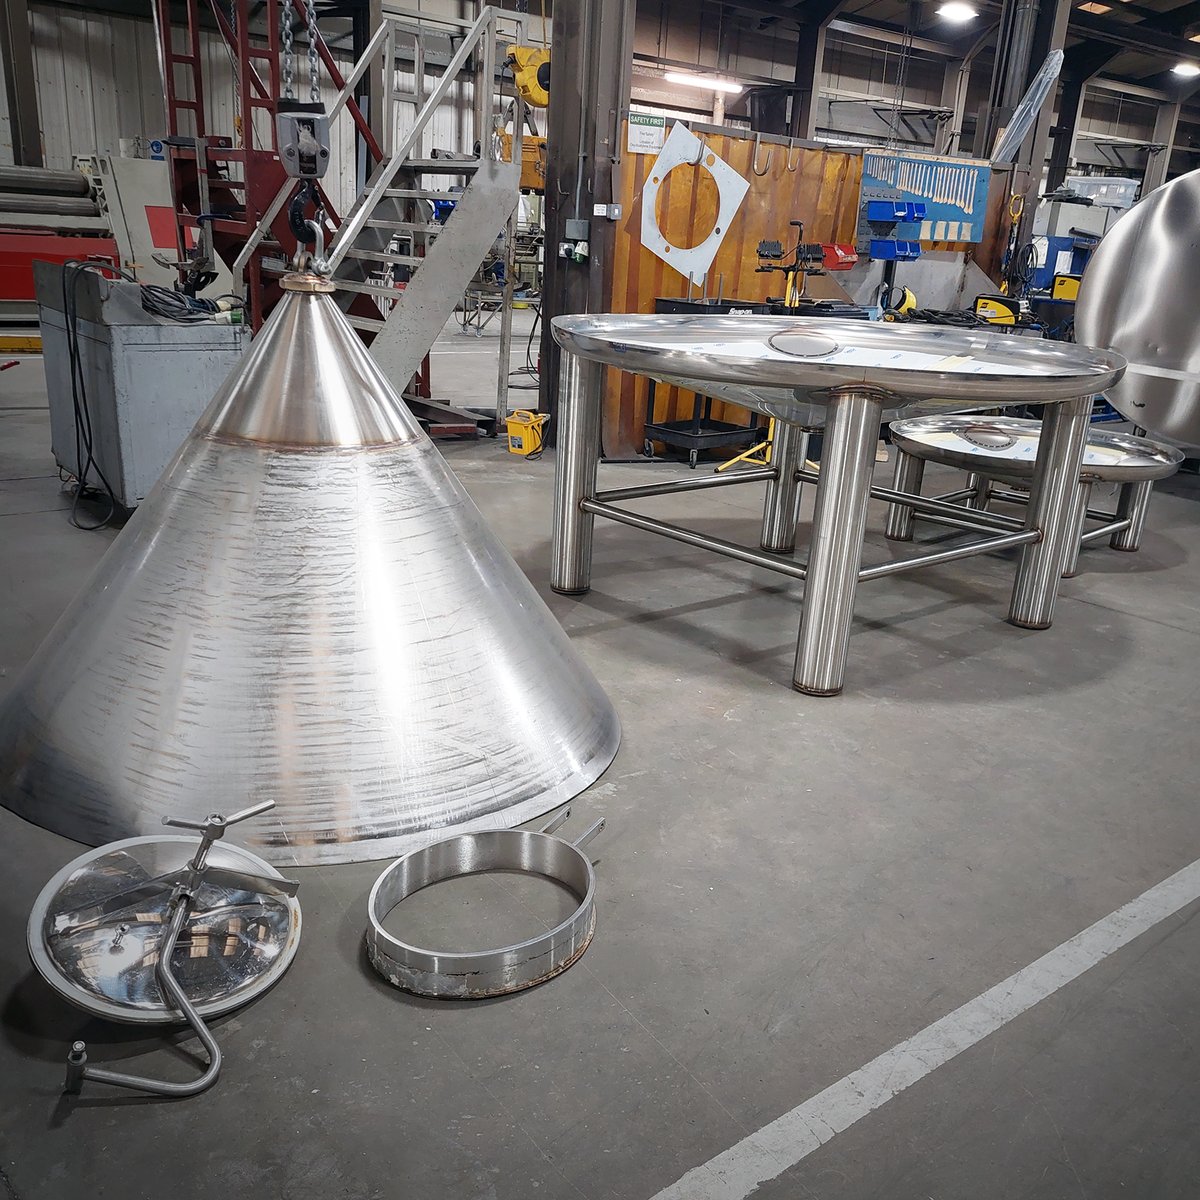 Brewery & Processing Vessel bases are advancing in the factory right now!

We take pride in excellent workmanship as our objective is to exceed customer expectations in the manufacture of stainless steel products.

#manufacturemonday #fabdec #ukmfg #britishmade #britanx